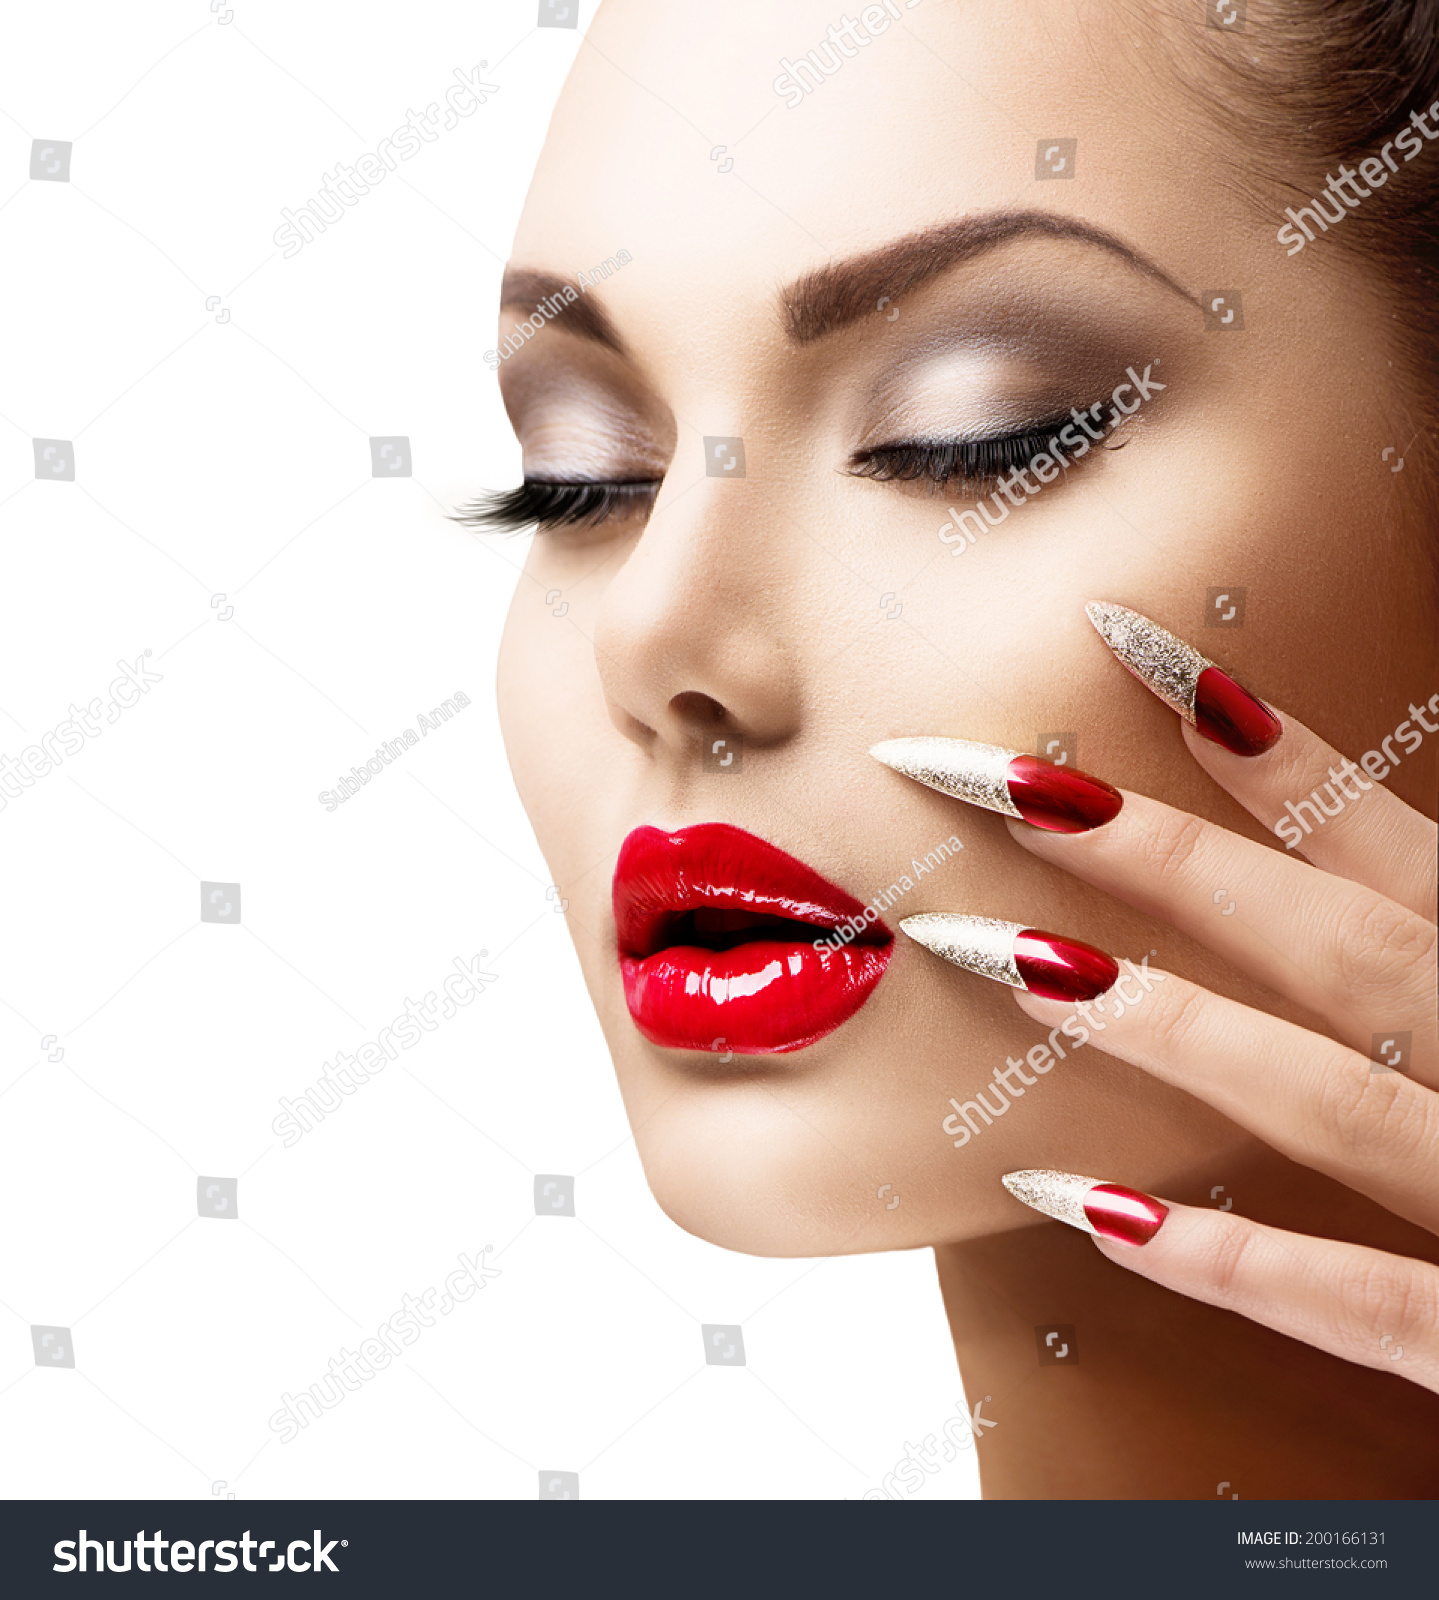 Don’t look after makeup, nails should be beautiful !